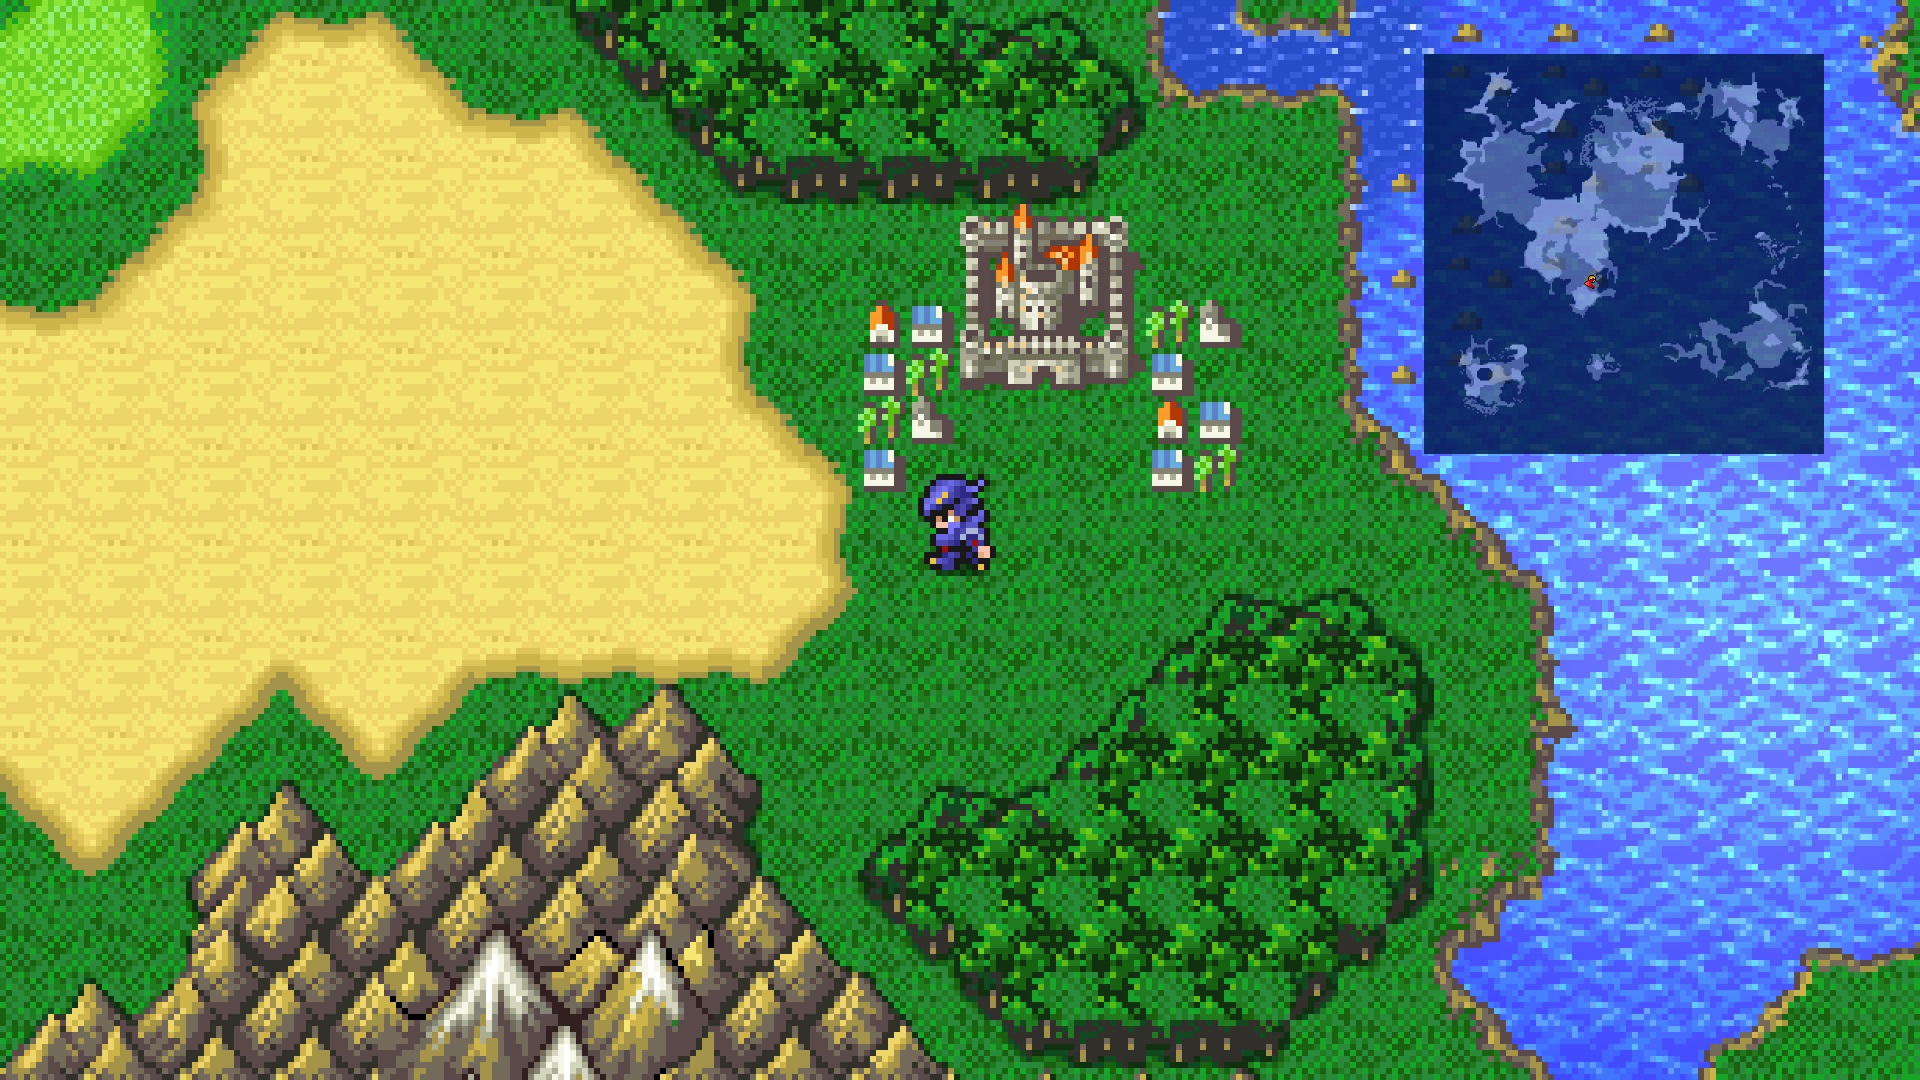 ‘Final Fantasy IV’ Pixel Remaster Releases on September 8th for iOS, Android, and Steam